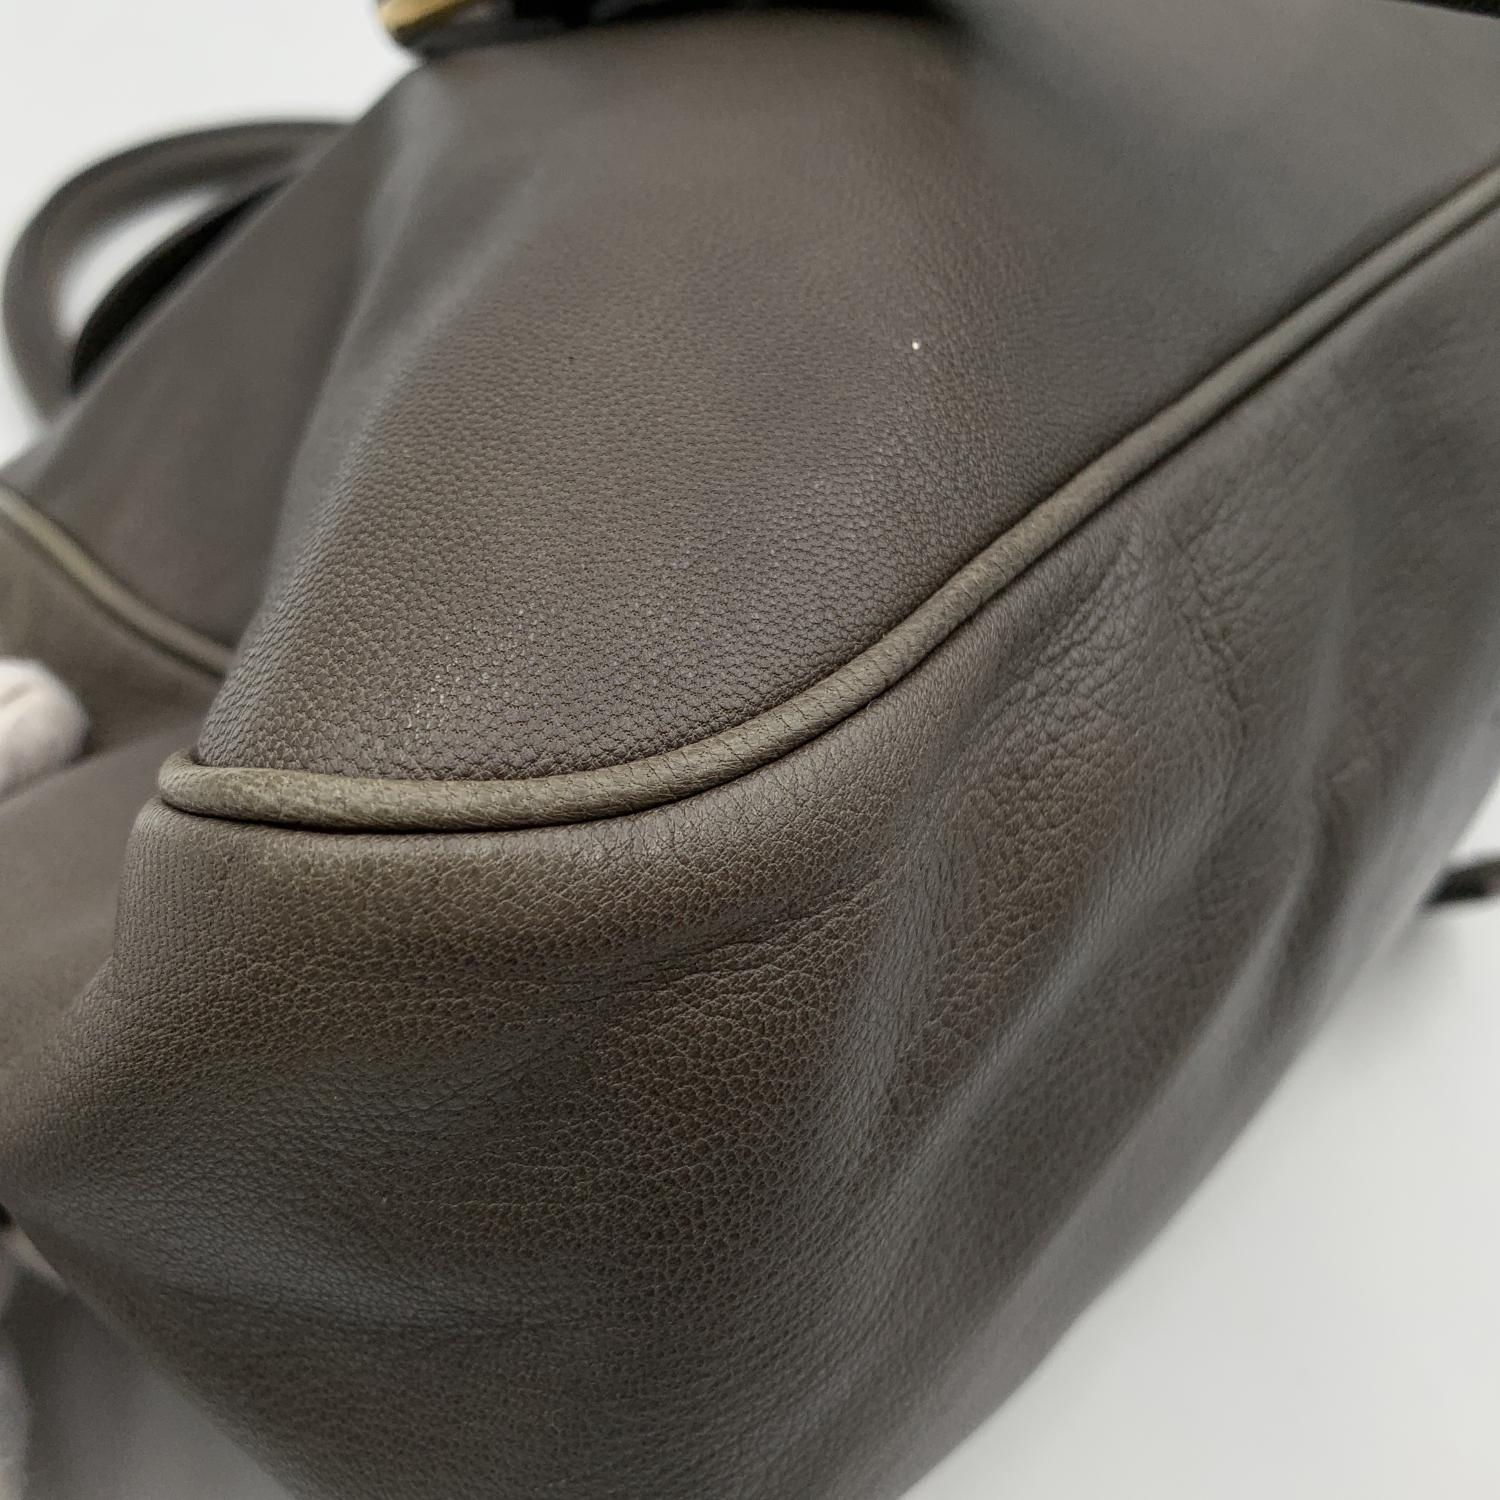 Yves Saint Laurent Grey Taupe Leather Muse Bowler Satchel Bag 5